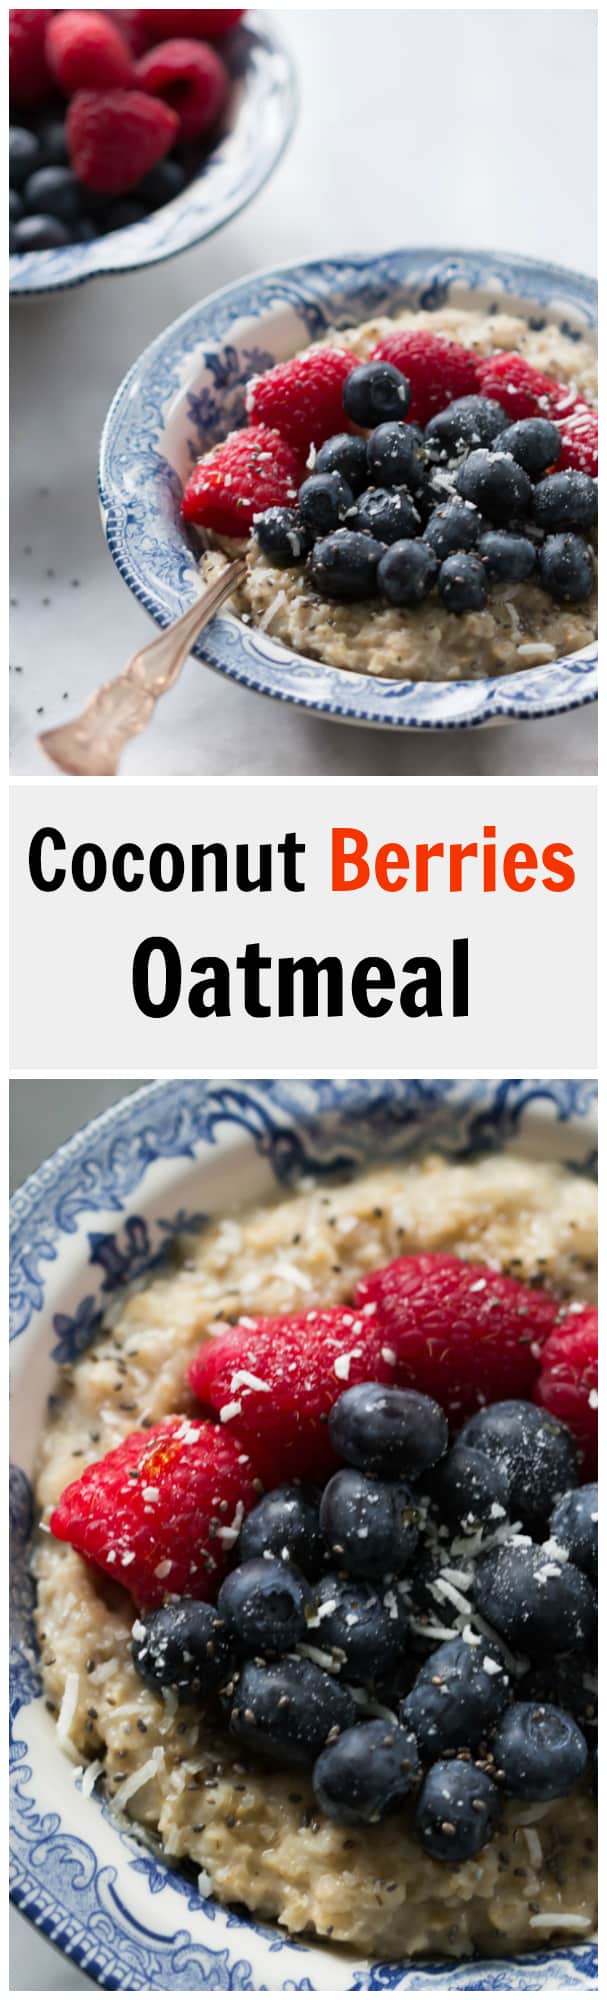 Coconut Berries Oatmeal - This delicious Coconut Berries Oatmeal is filling, vegan and gluten-free. It is made with coconut milk, chia, rolled oat and chia seeds. 